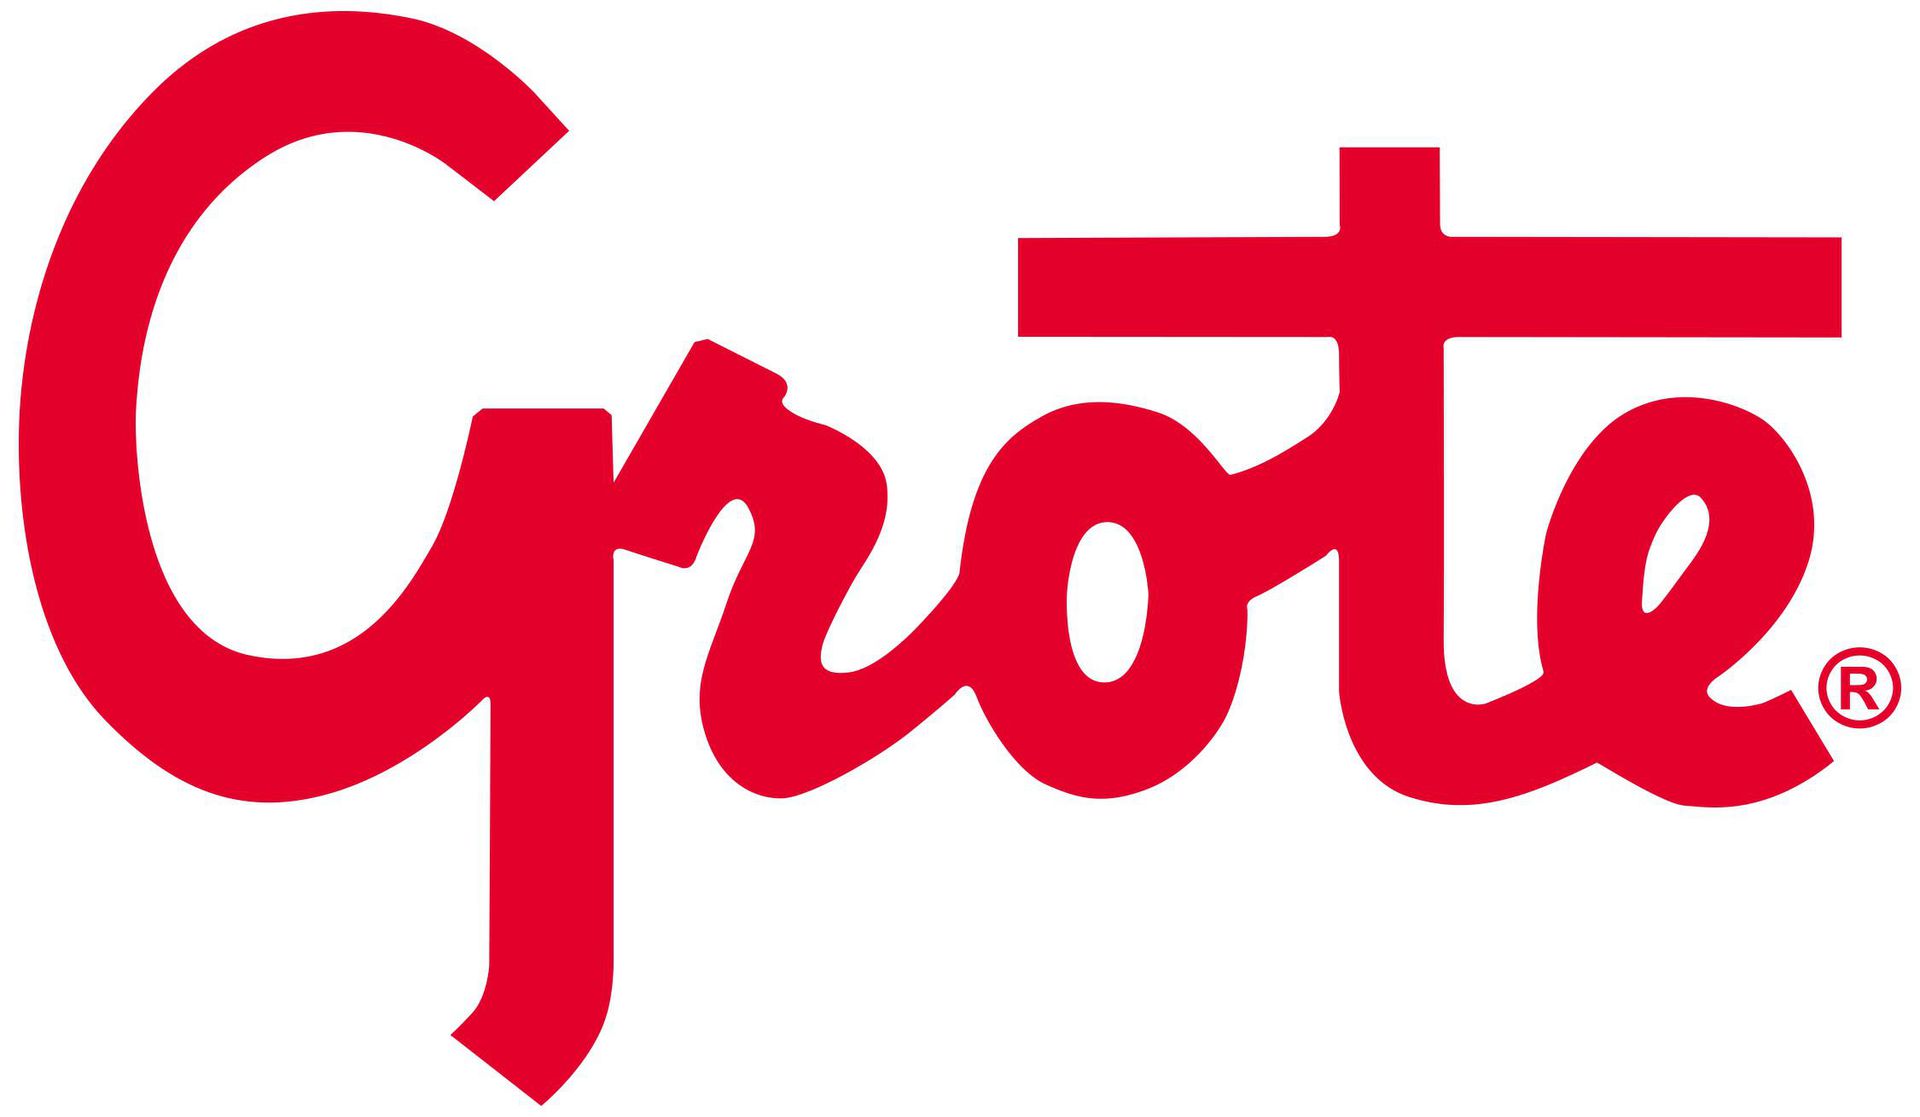 Grote Manufacturing